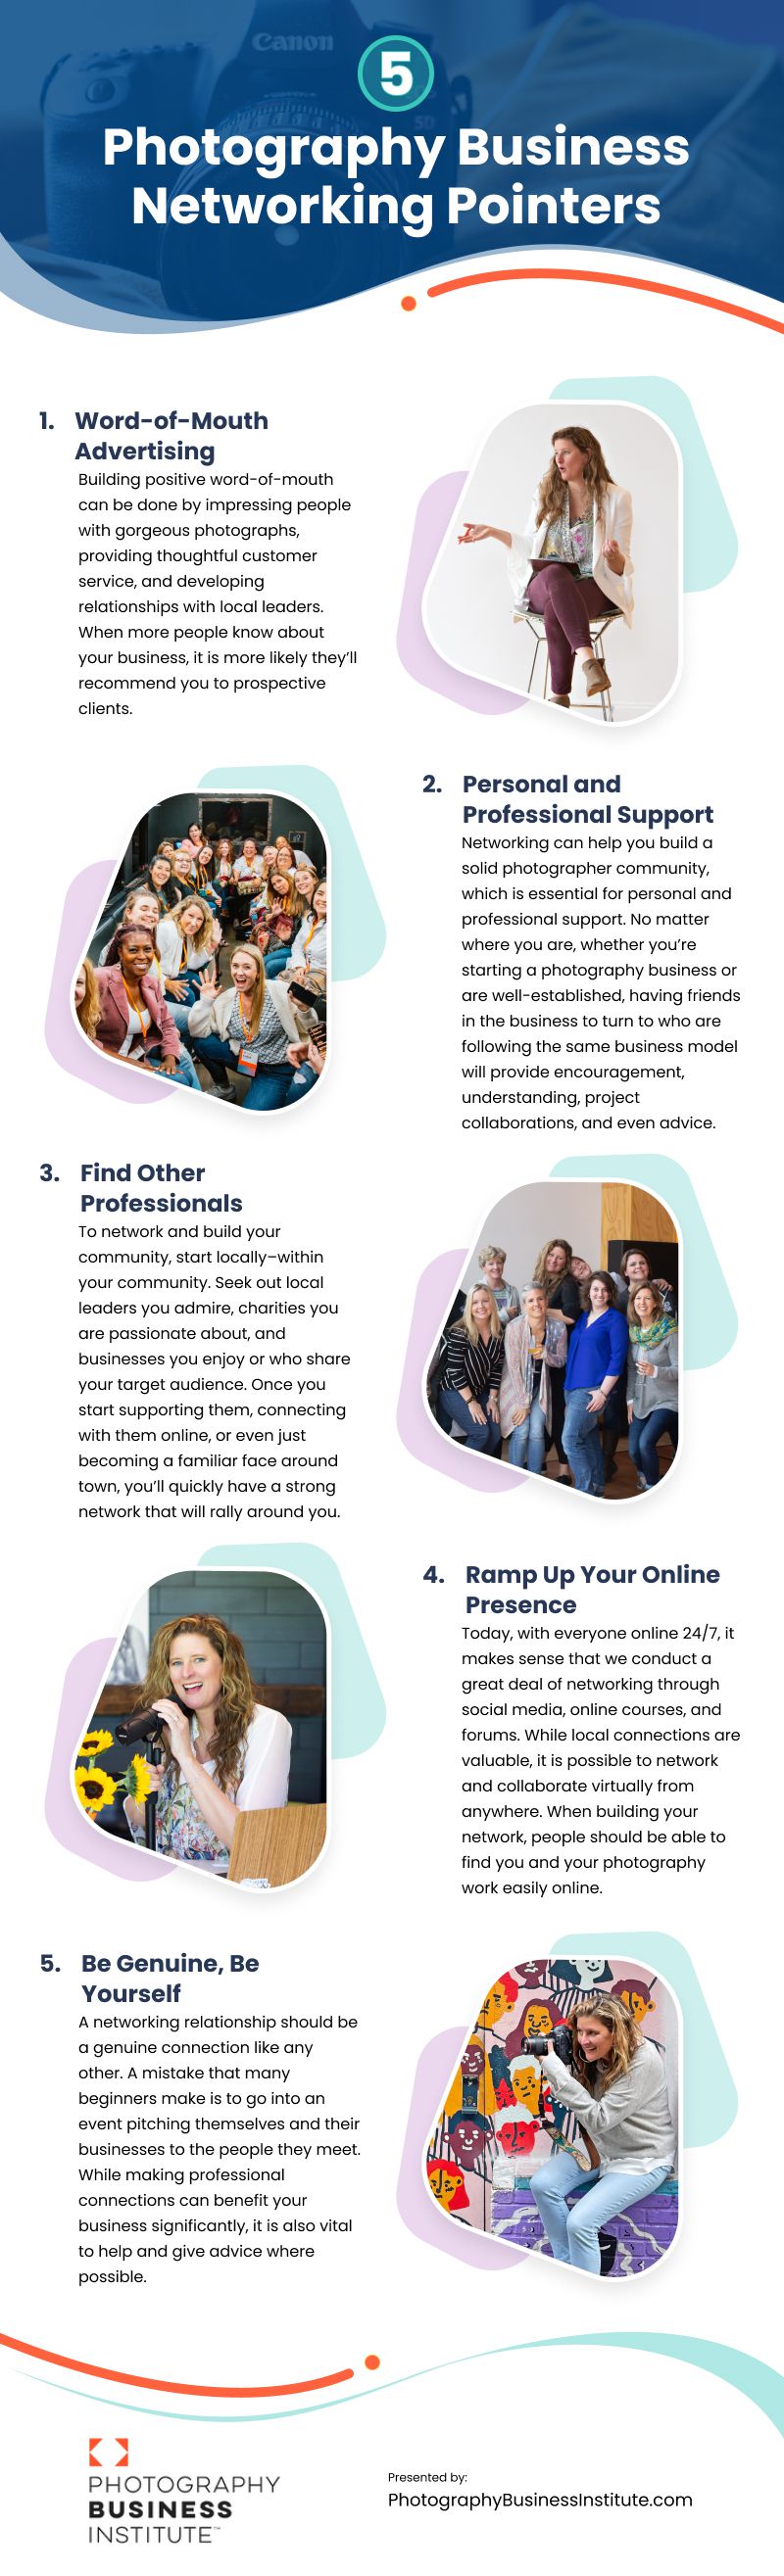 5 Photography Business Networking Pointers Infographic